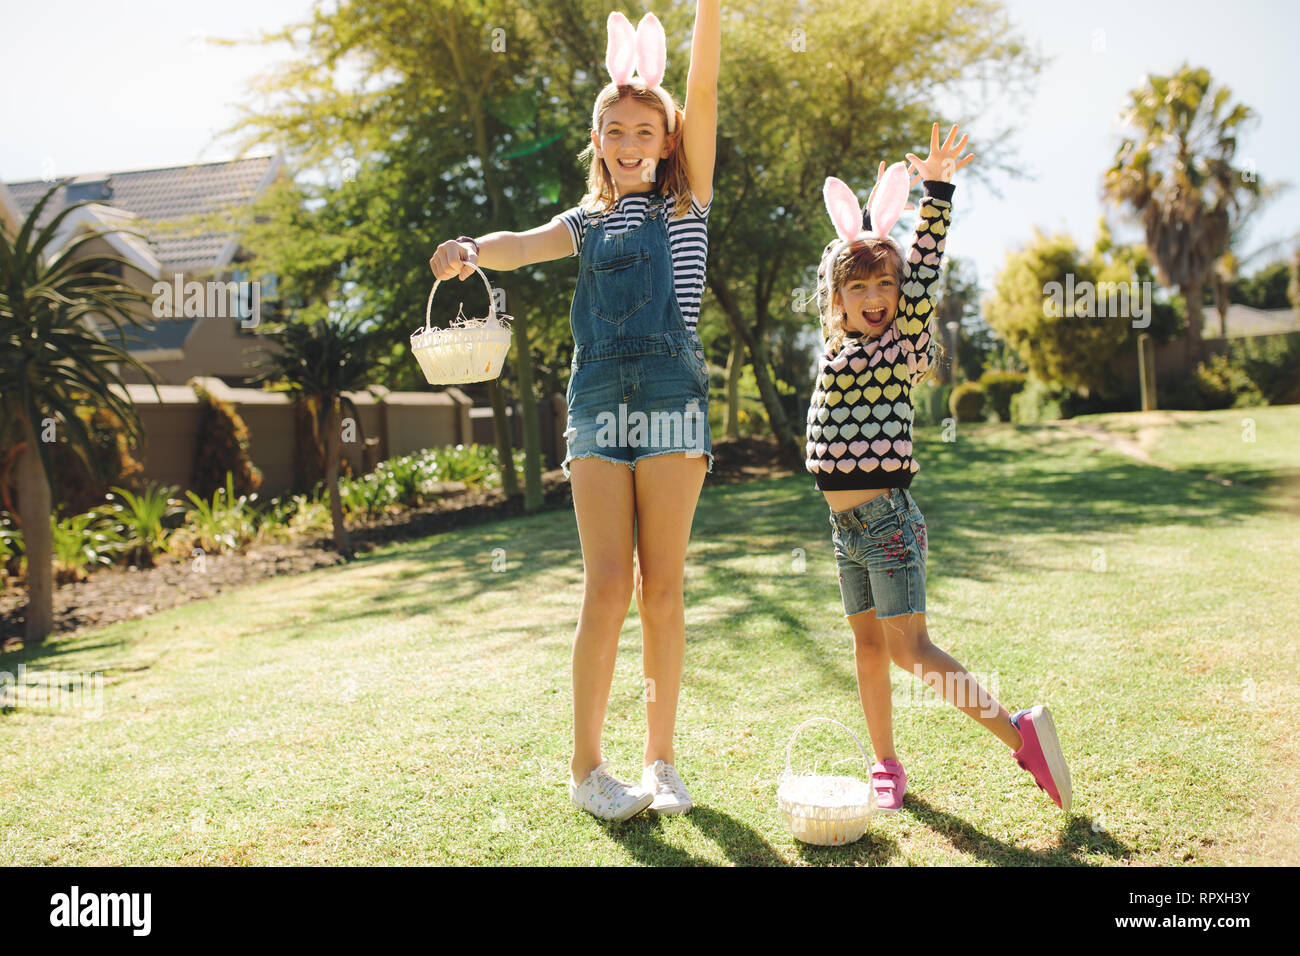 Two kids playing in a garden holding baskets. Girls wearing fancy rabbit ear headband and playing outdoors on a sunny day. Stock Photo